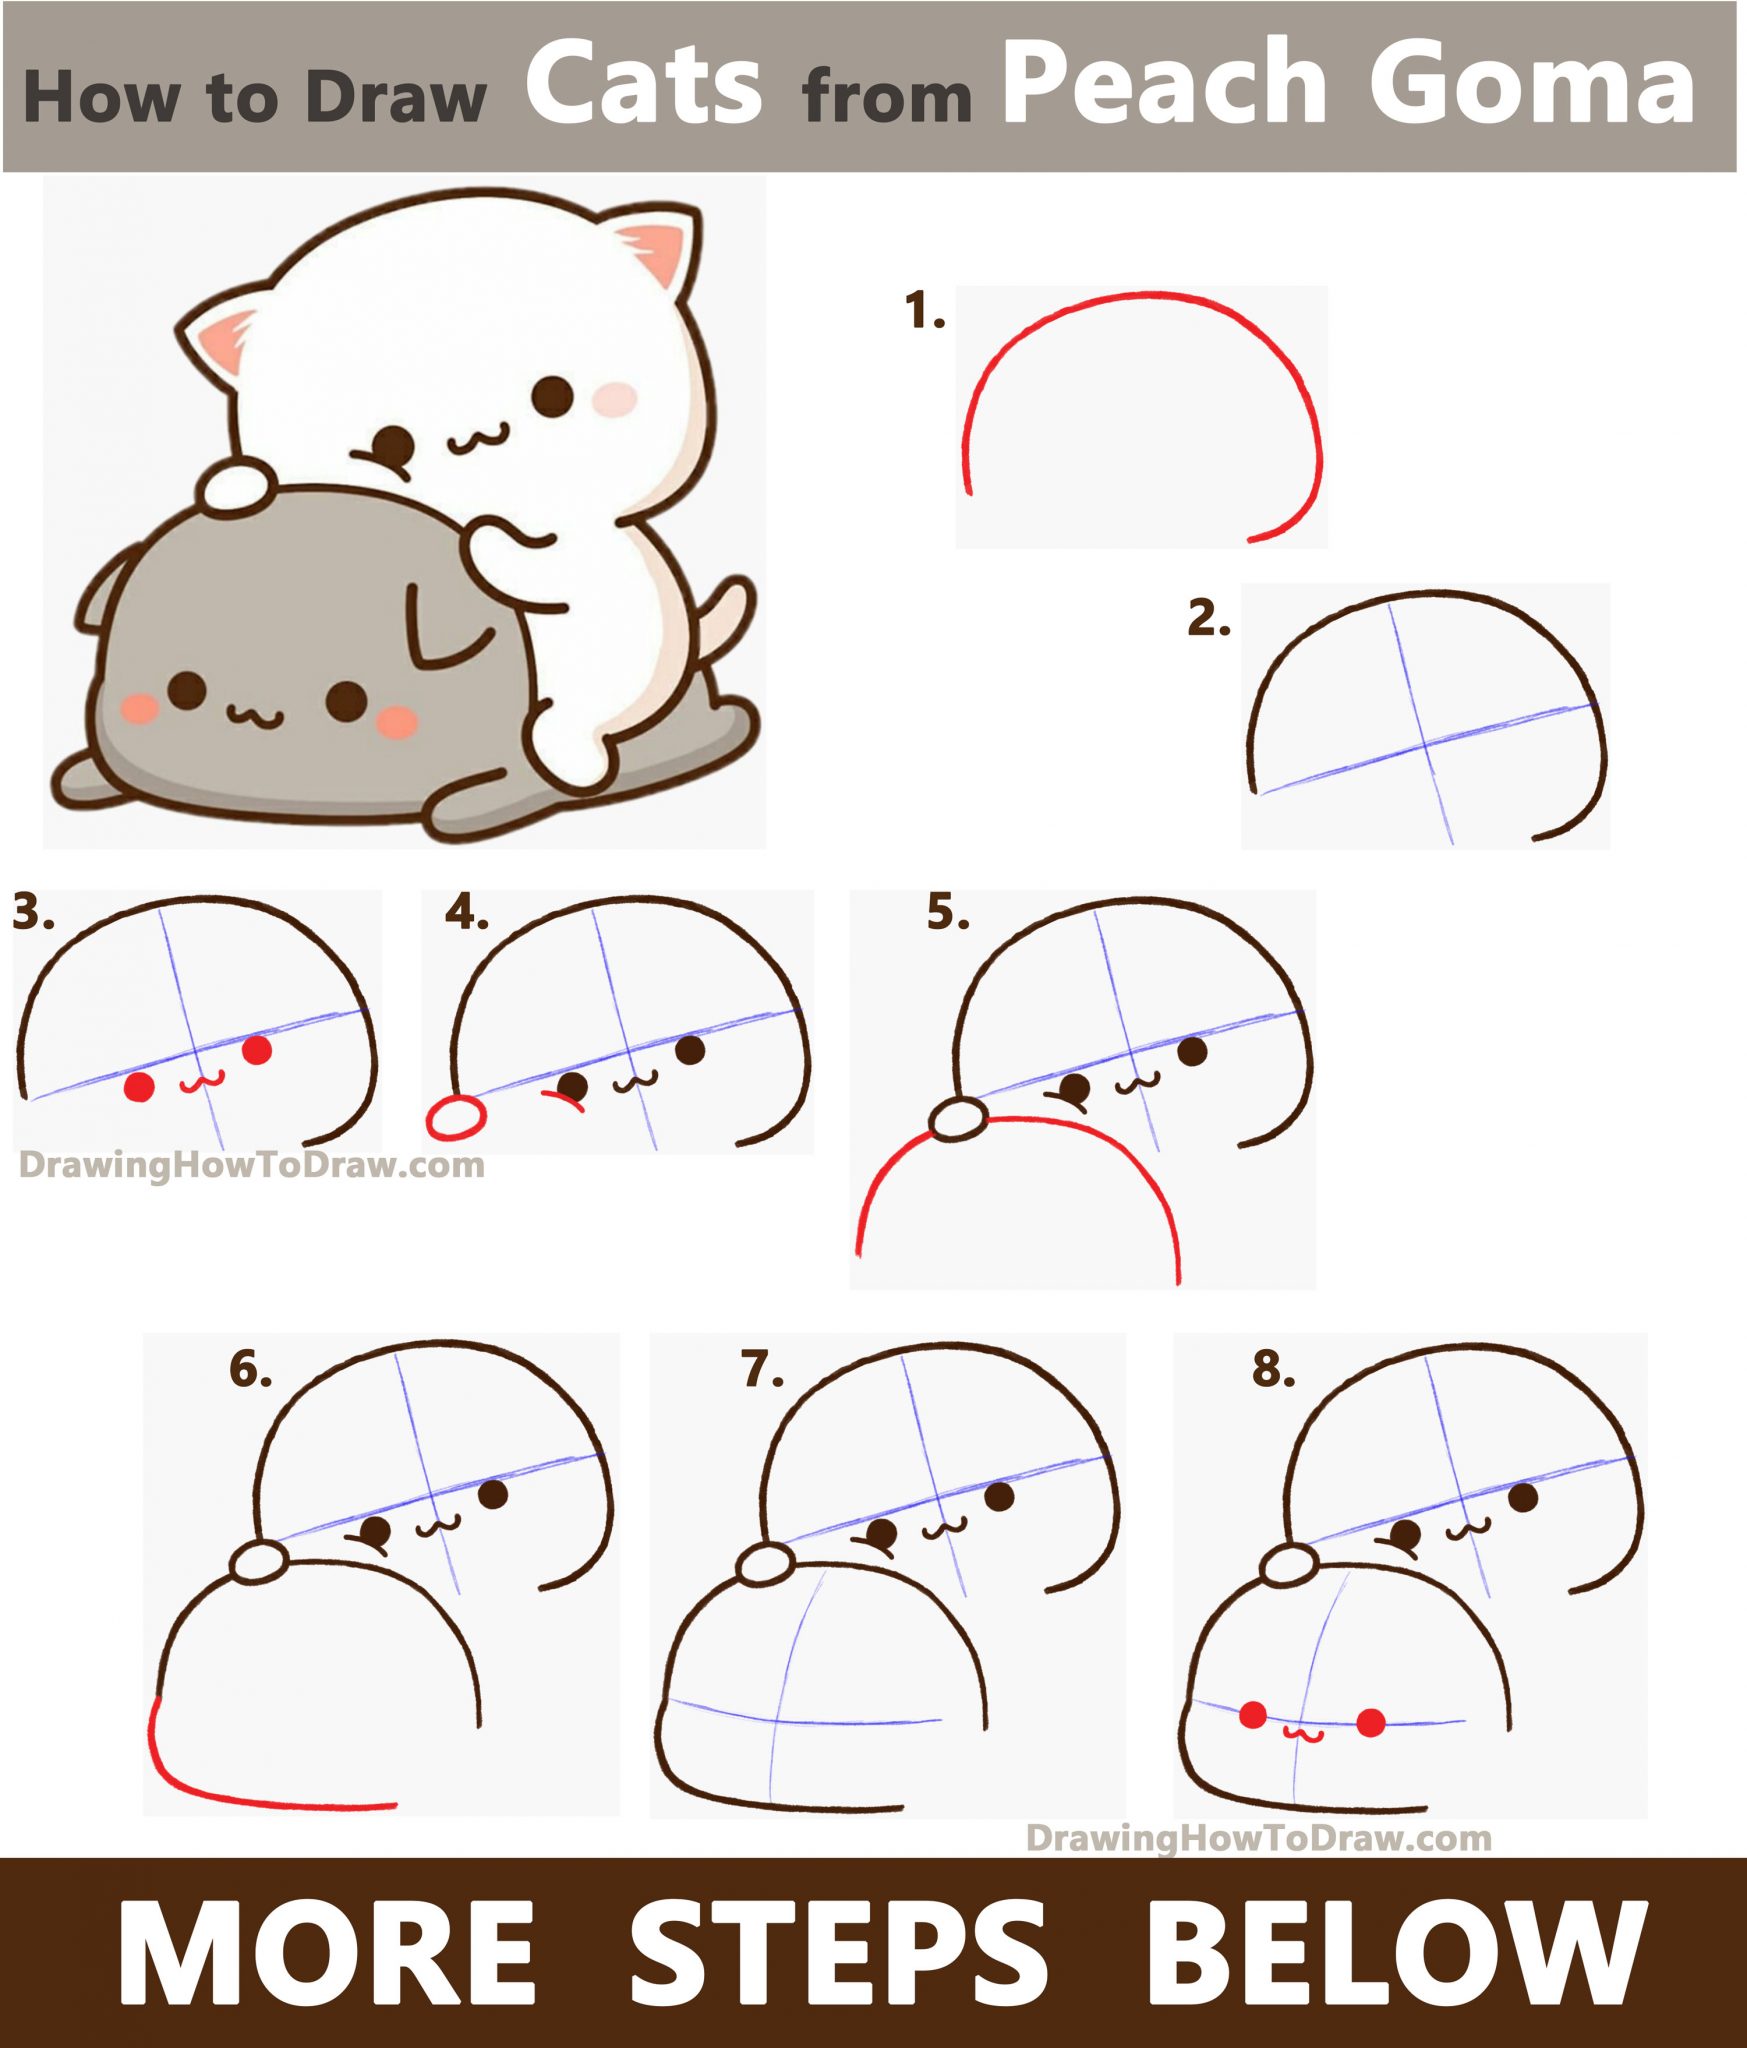 How to Draw 2 Cats from Peach Goma (Super Cute / Kawaii) Easy Step by ...